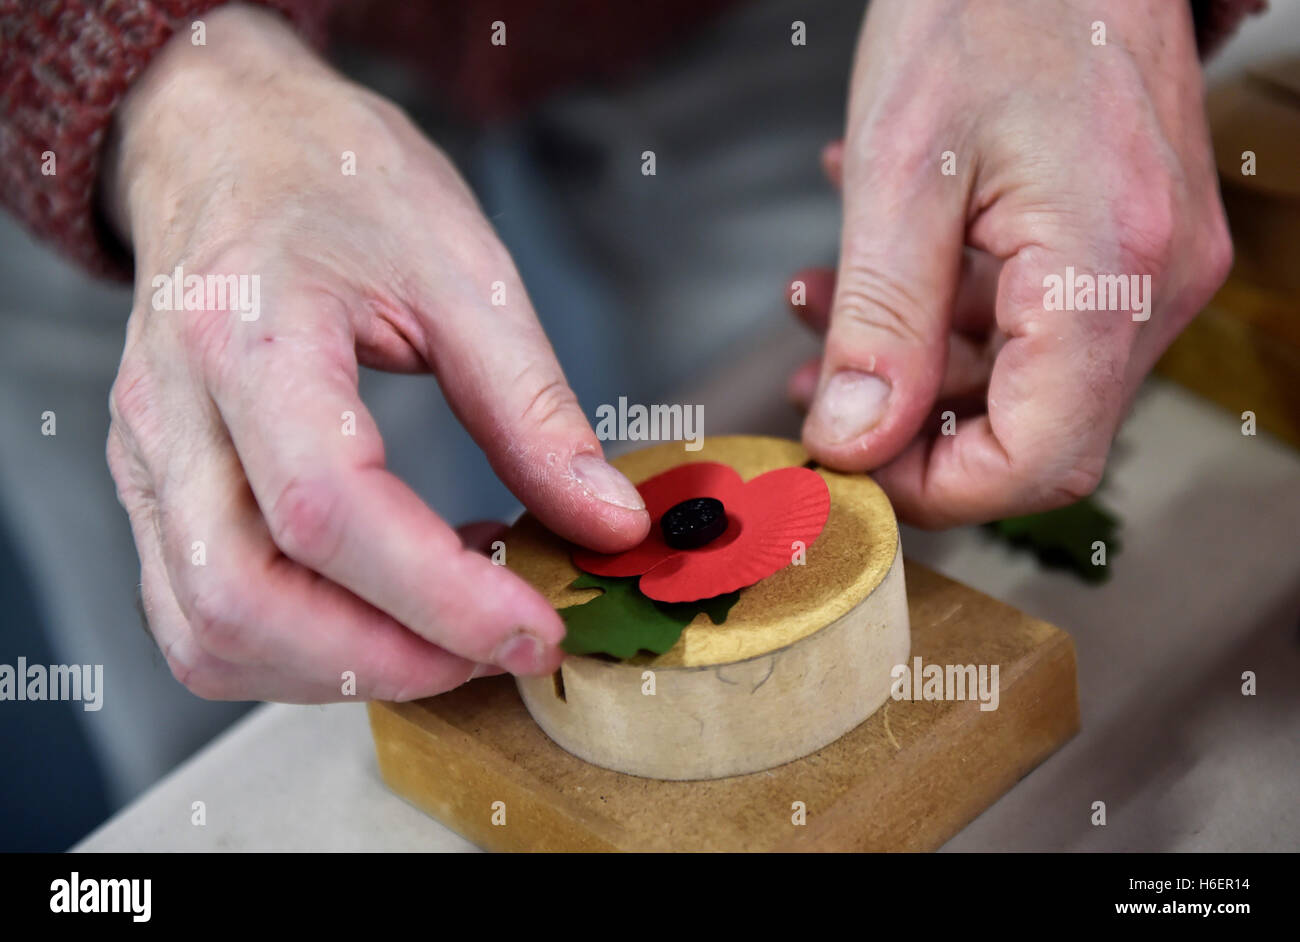 A worker puts together the components of a standard poppy at a Poppy Factory in Richmond, London, as the Royal British Legion mark the first day of their annual Poppy Appeal. Stock Photo